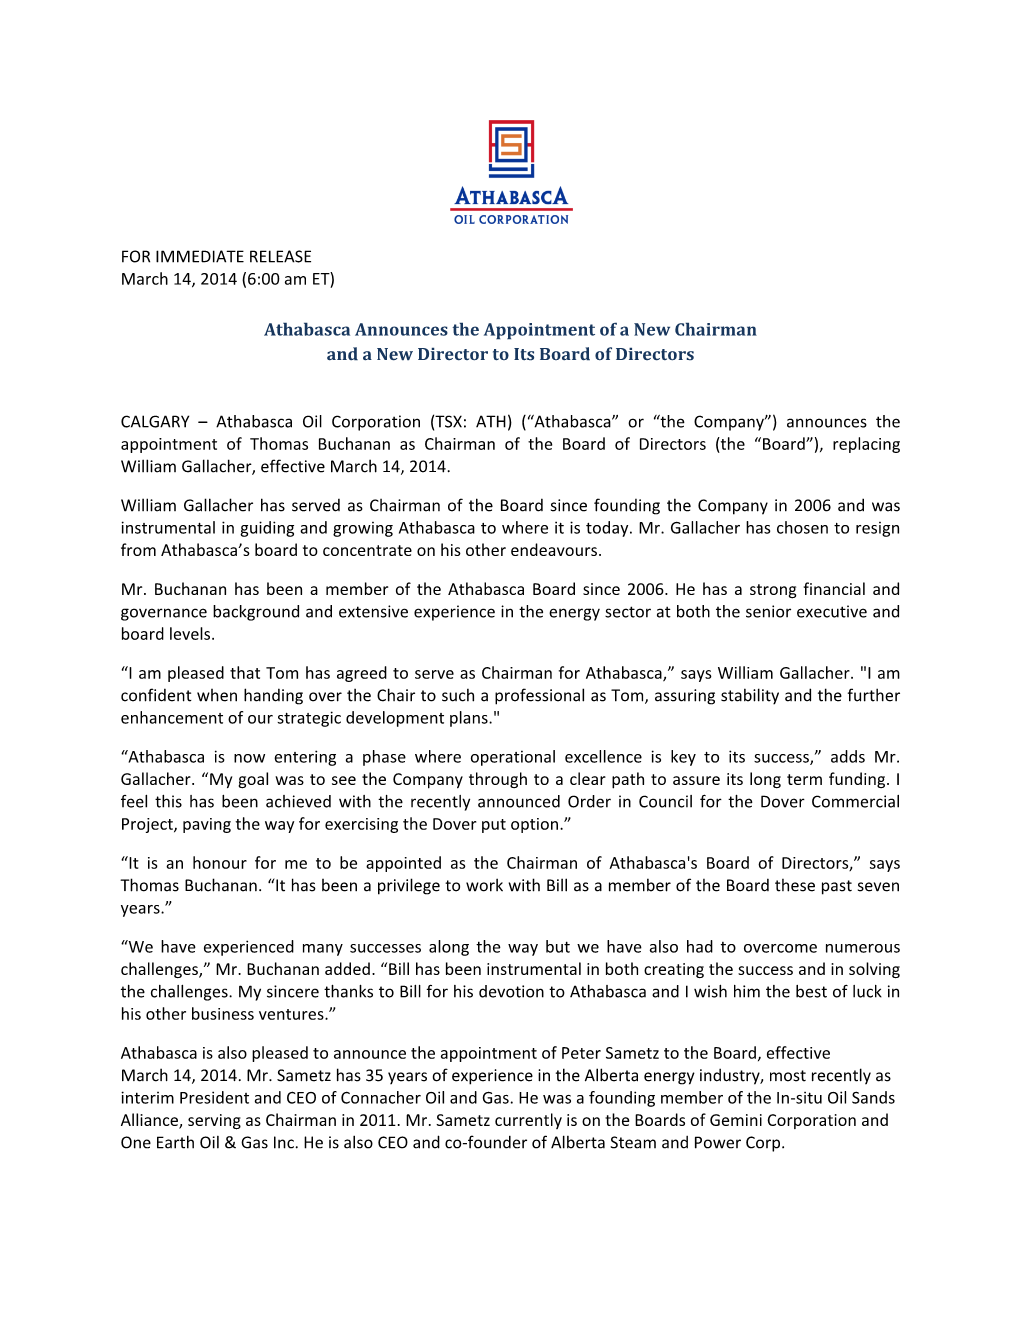 FOR IMMEDIATE RELEASE March 14, 2014 (6:00 Am ET)